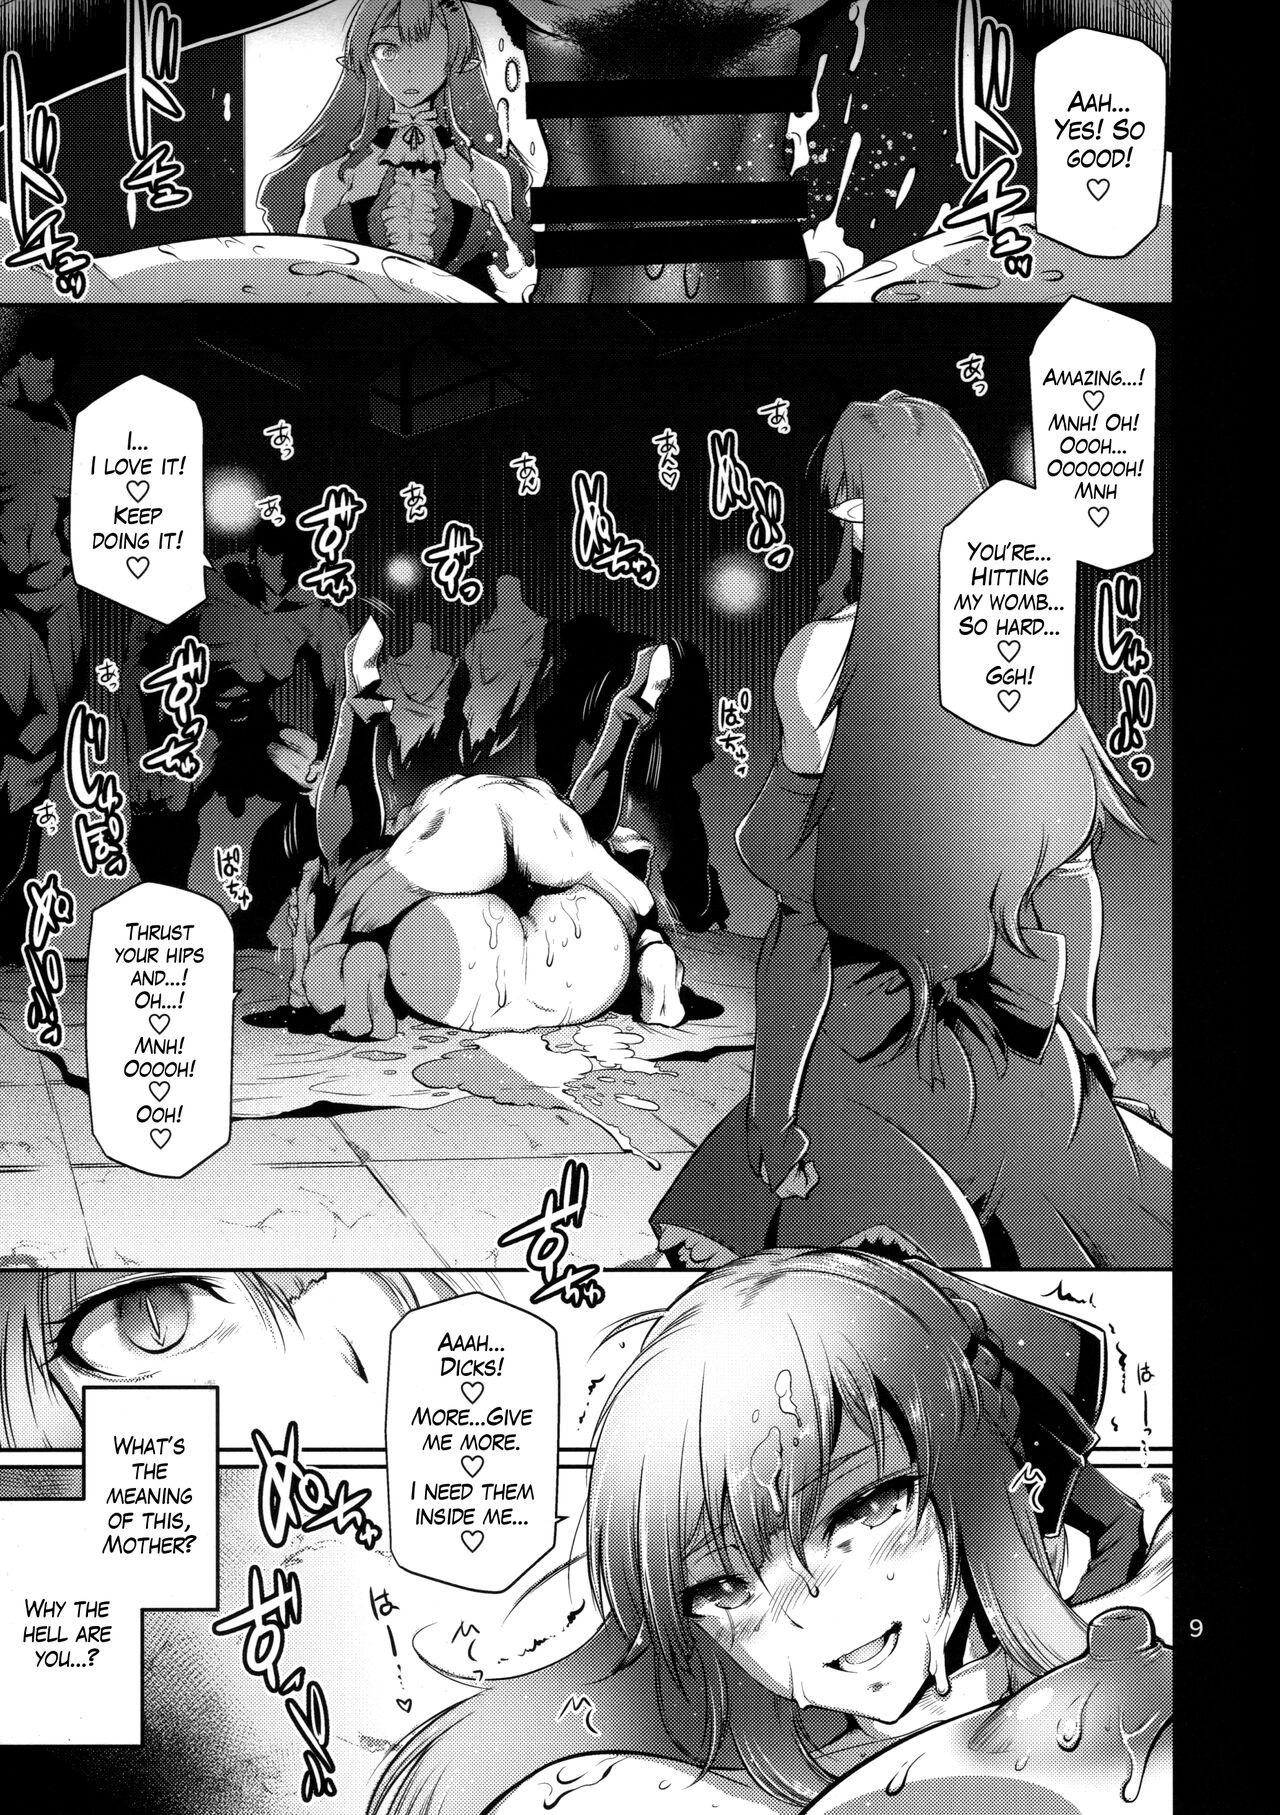 Leaked Taikan Joou | The Crowned Queen of Adultery - Fate grand order Oiled - Page 8